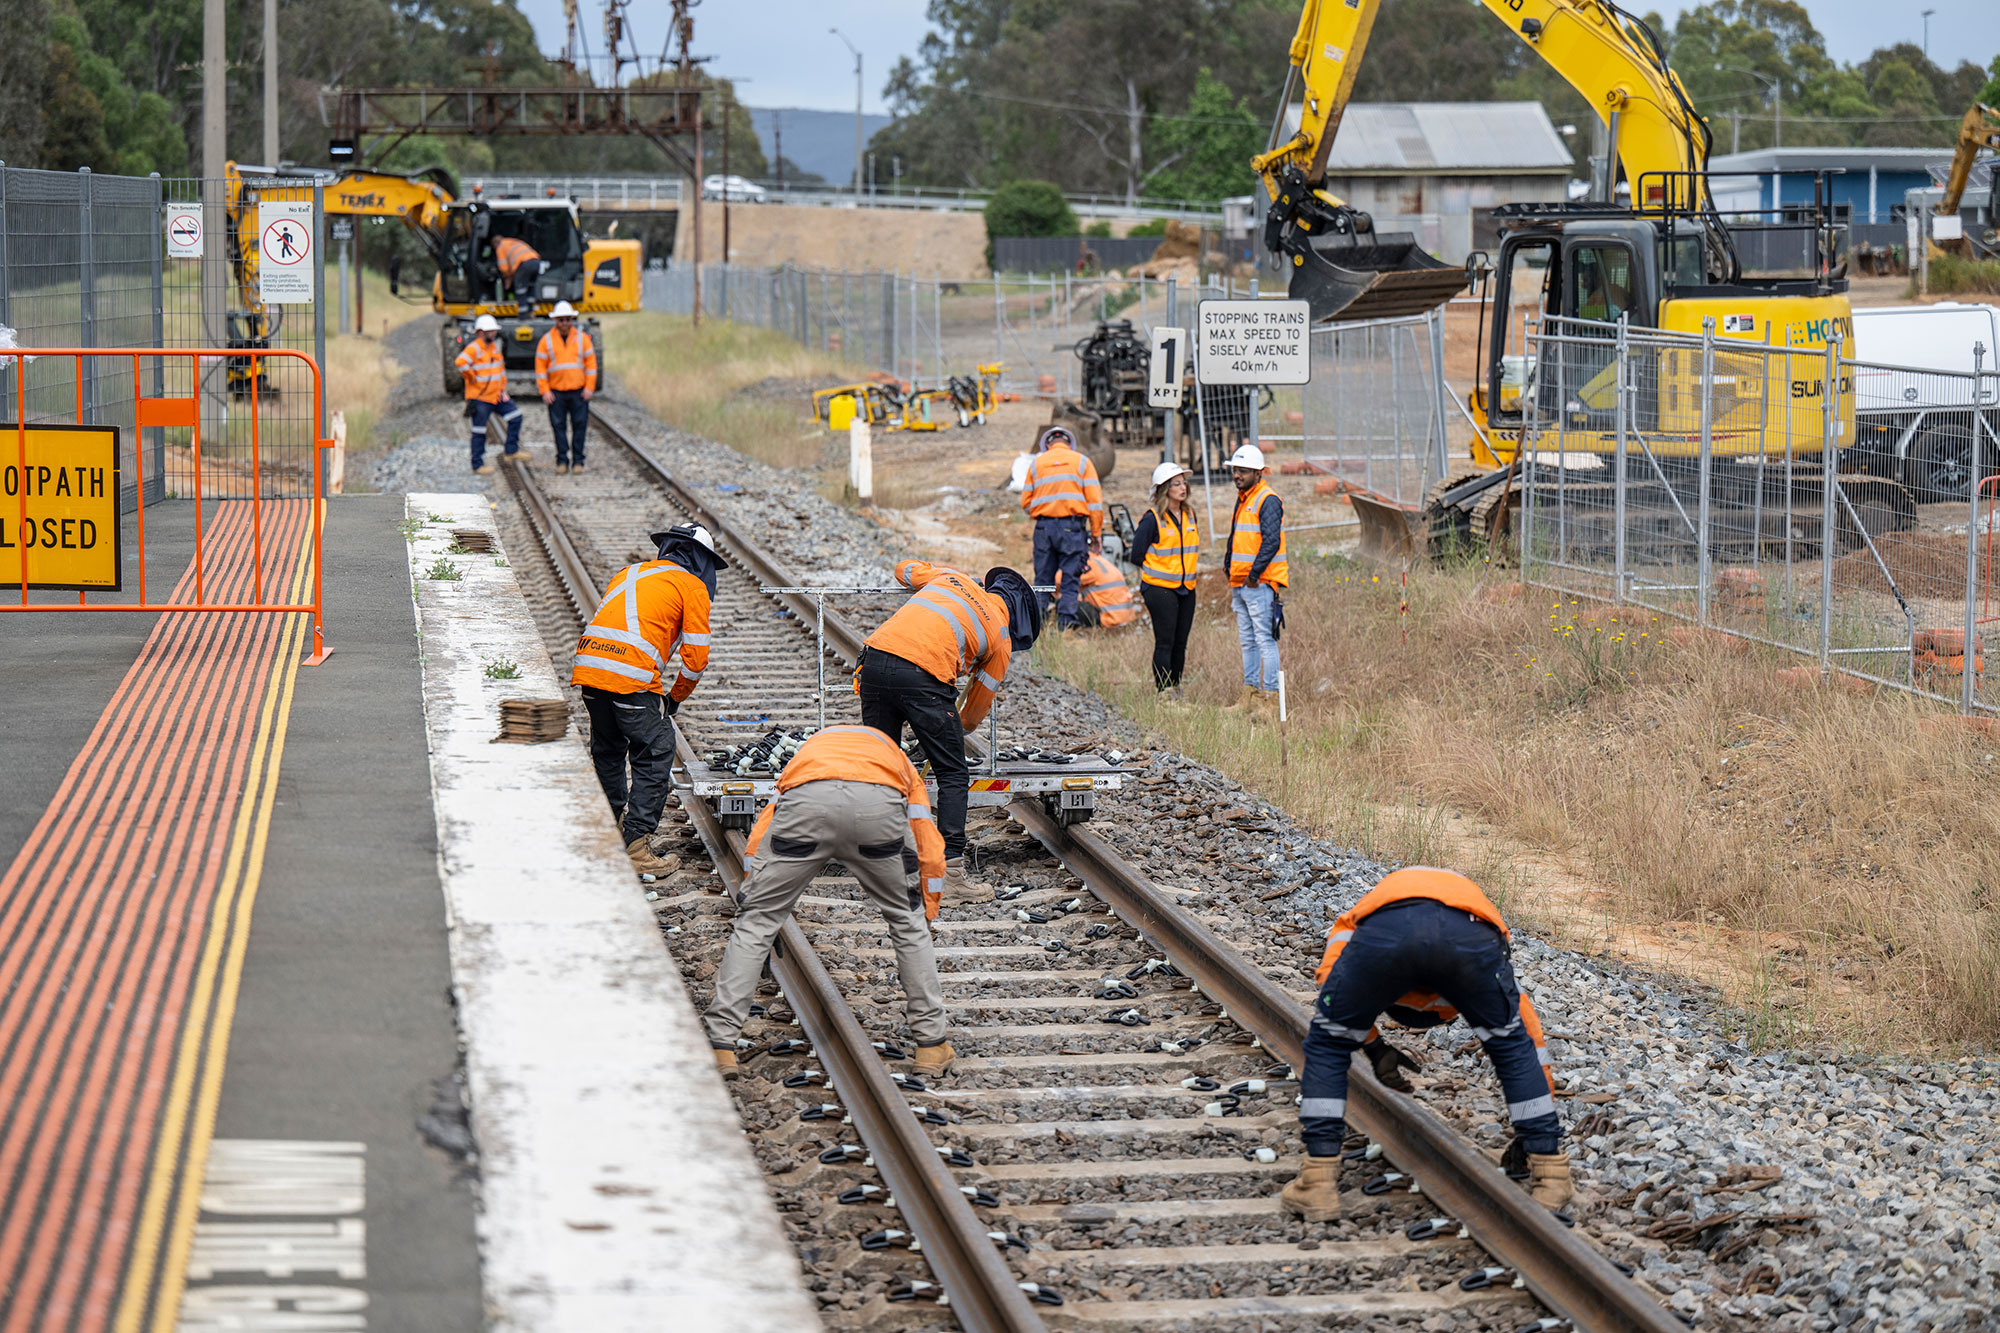 Track upgrades are undertaken at Wangaratta Station ahead of relocating the freight line and constructing the new platform